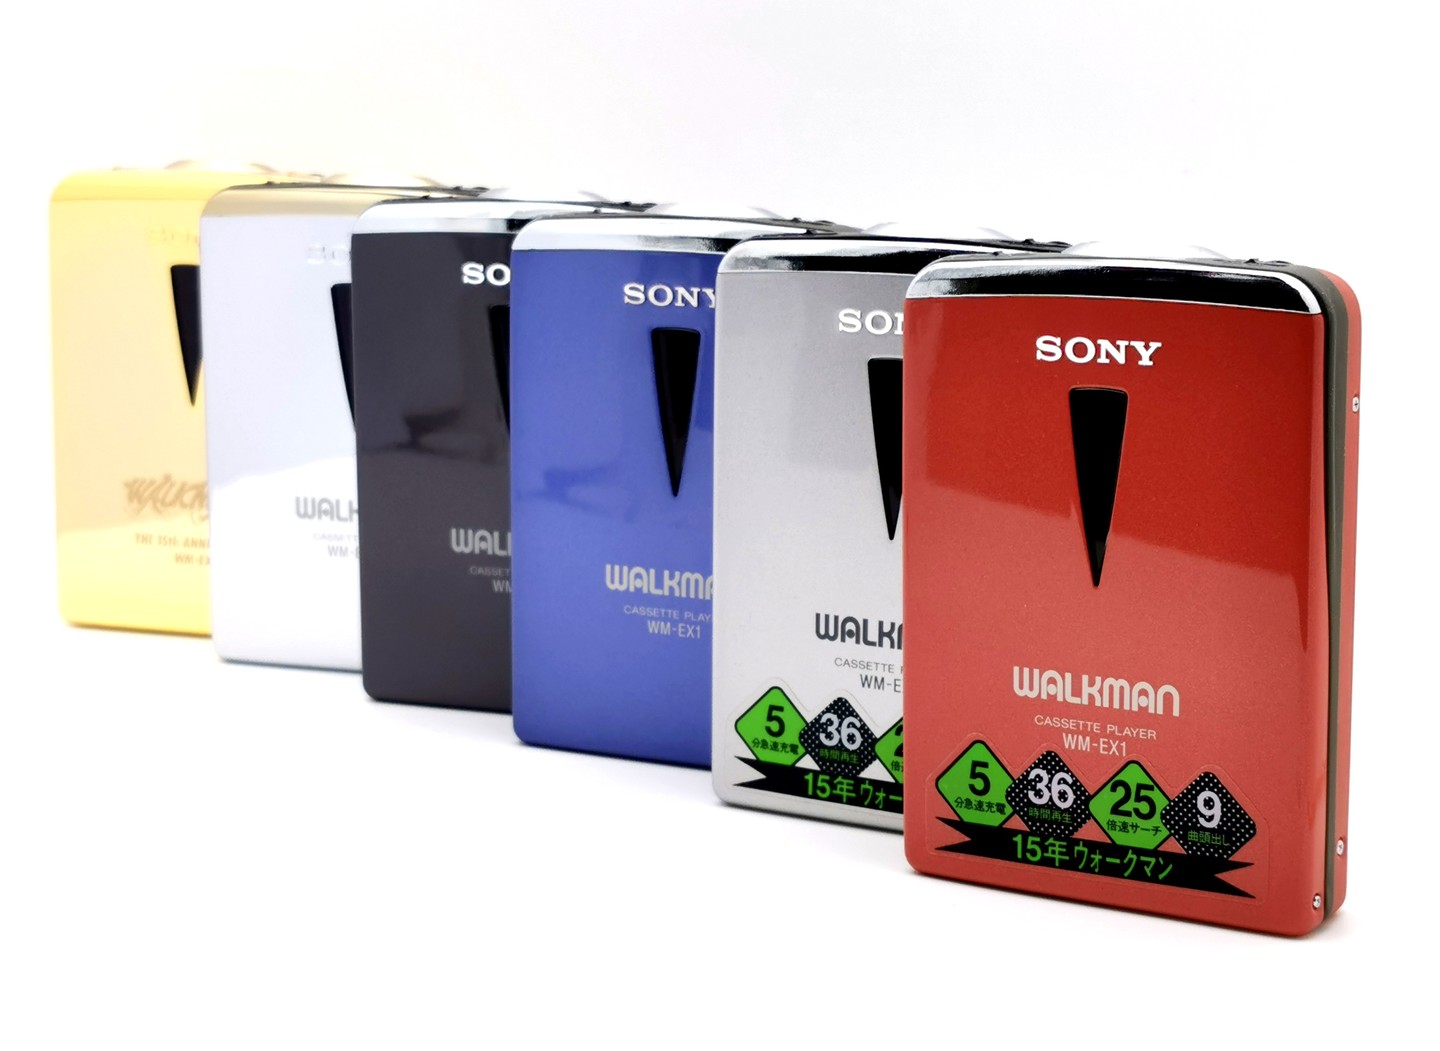 Sony_WM-EX1_-_All_colors_front_ig-boxedwalkman